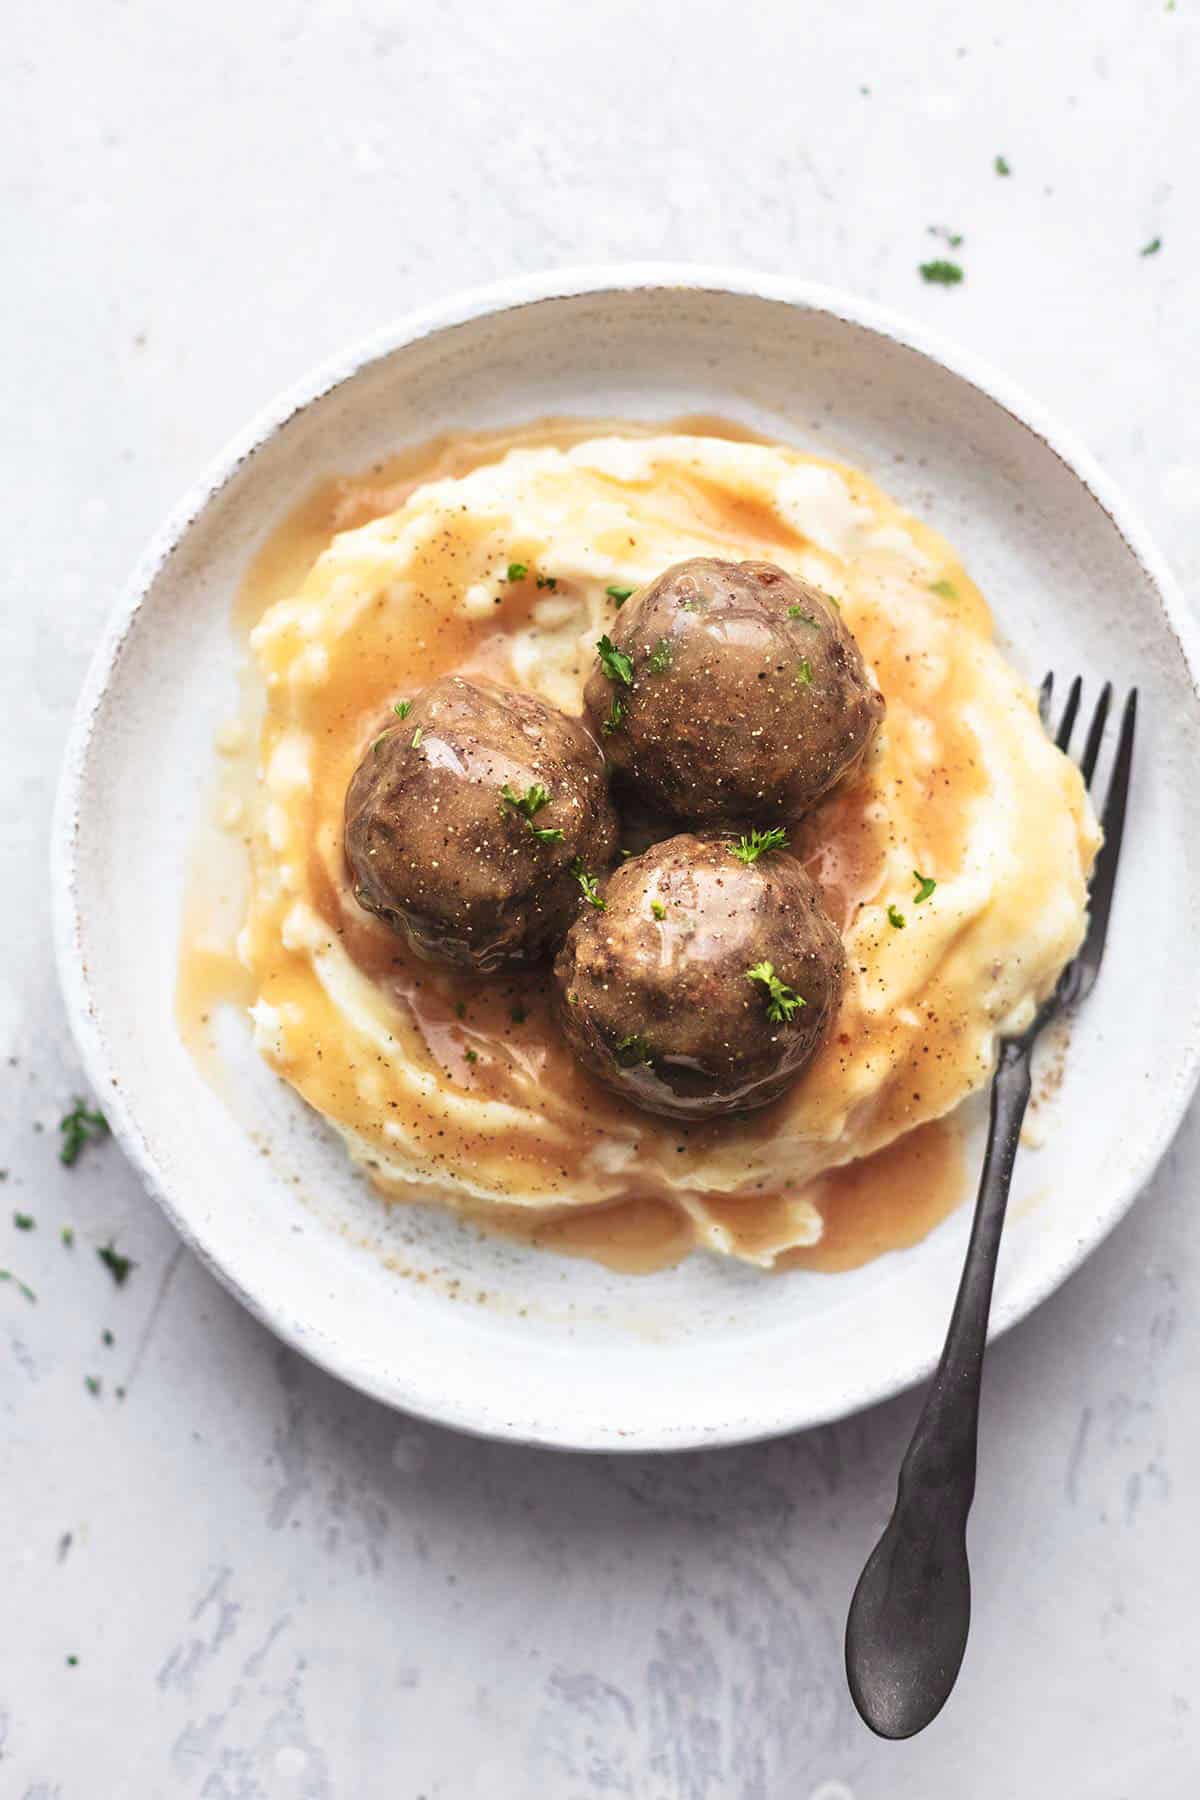 top view of meatballs on top of mashed potatoes and gravy with a fork on a plate.